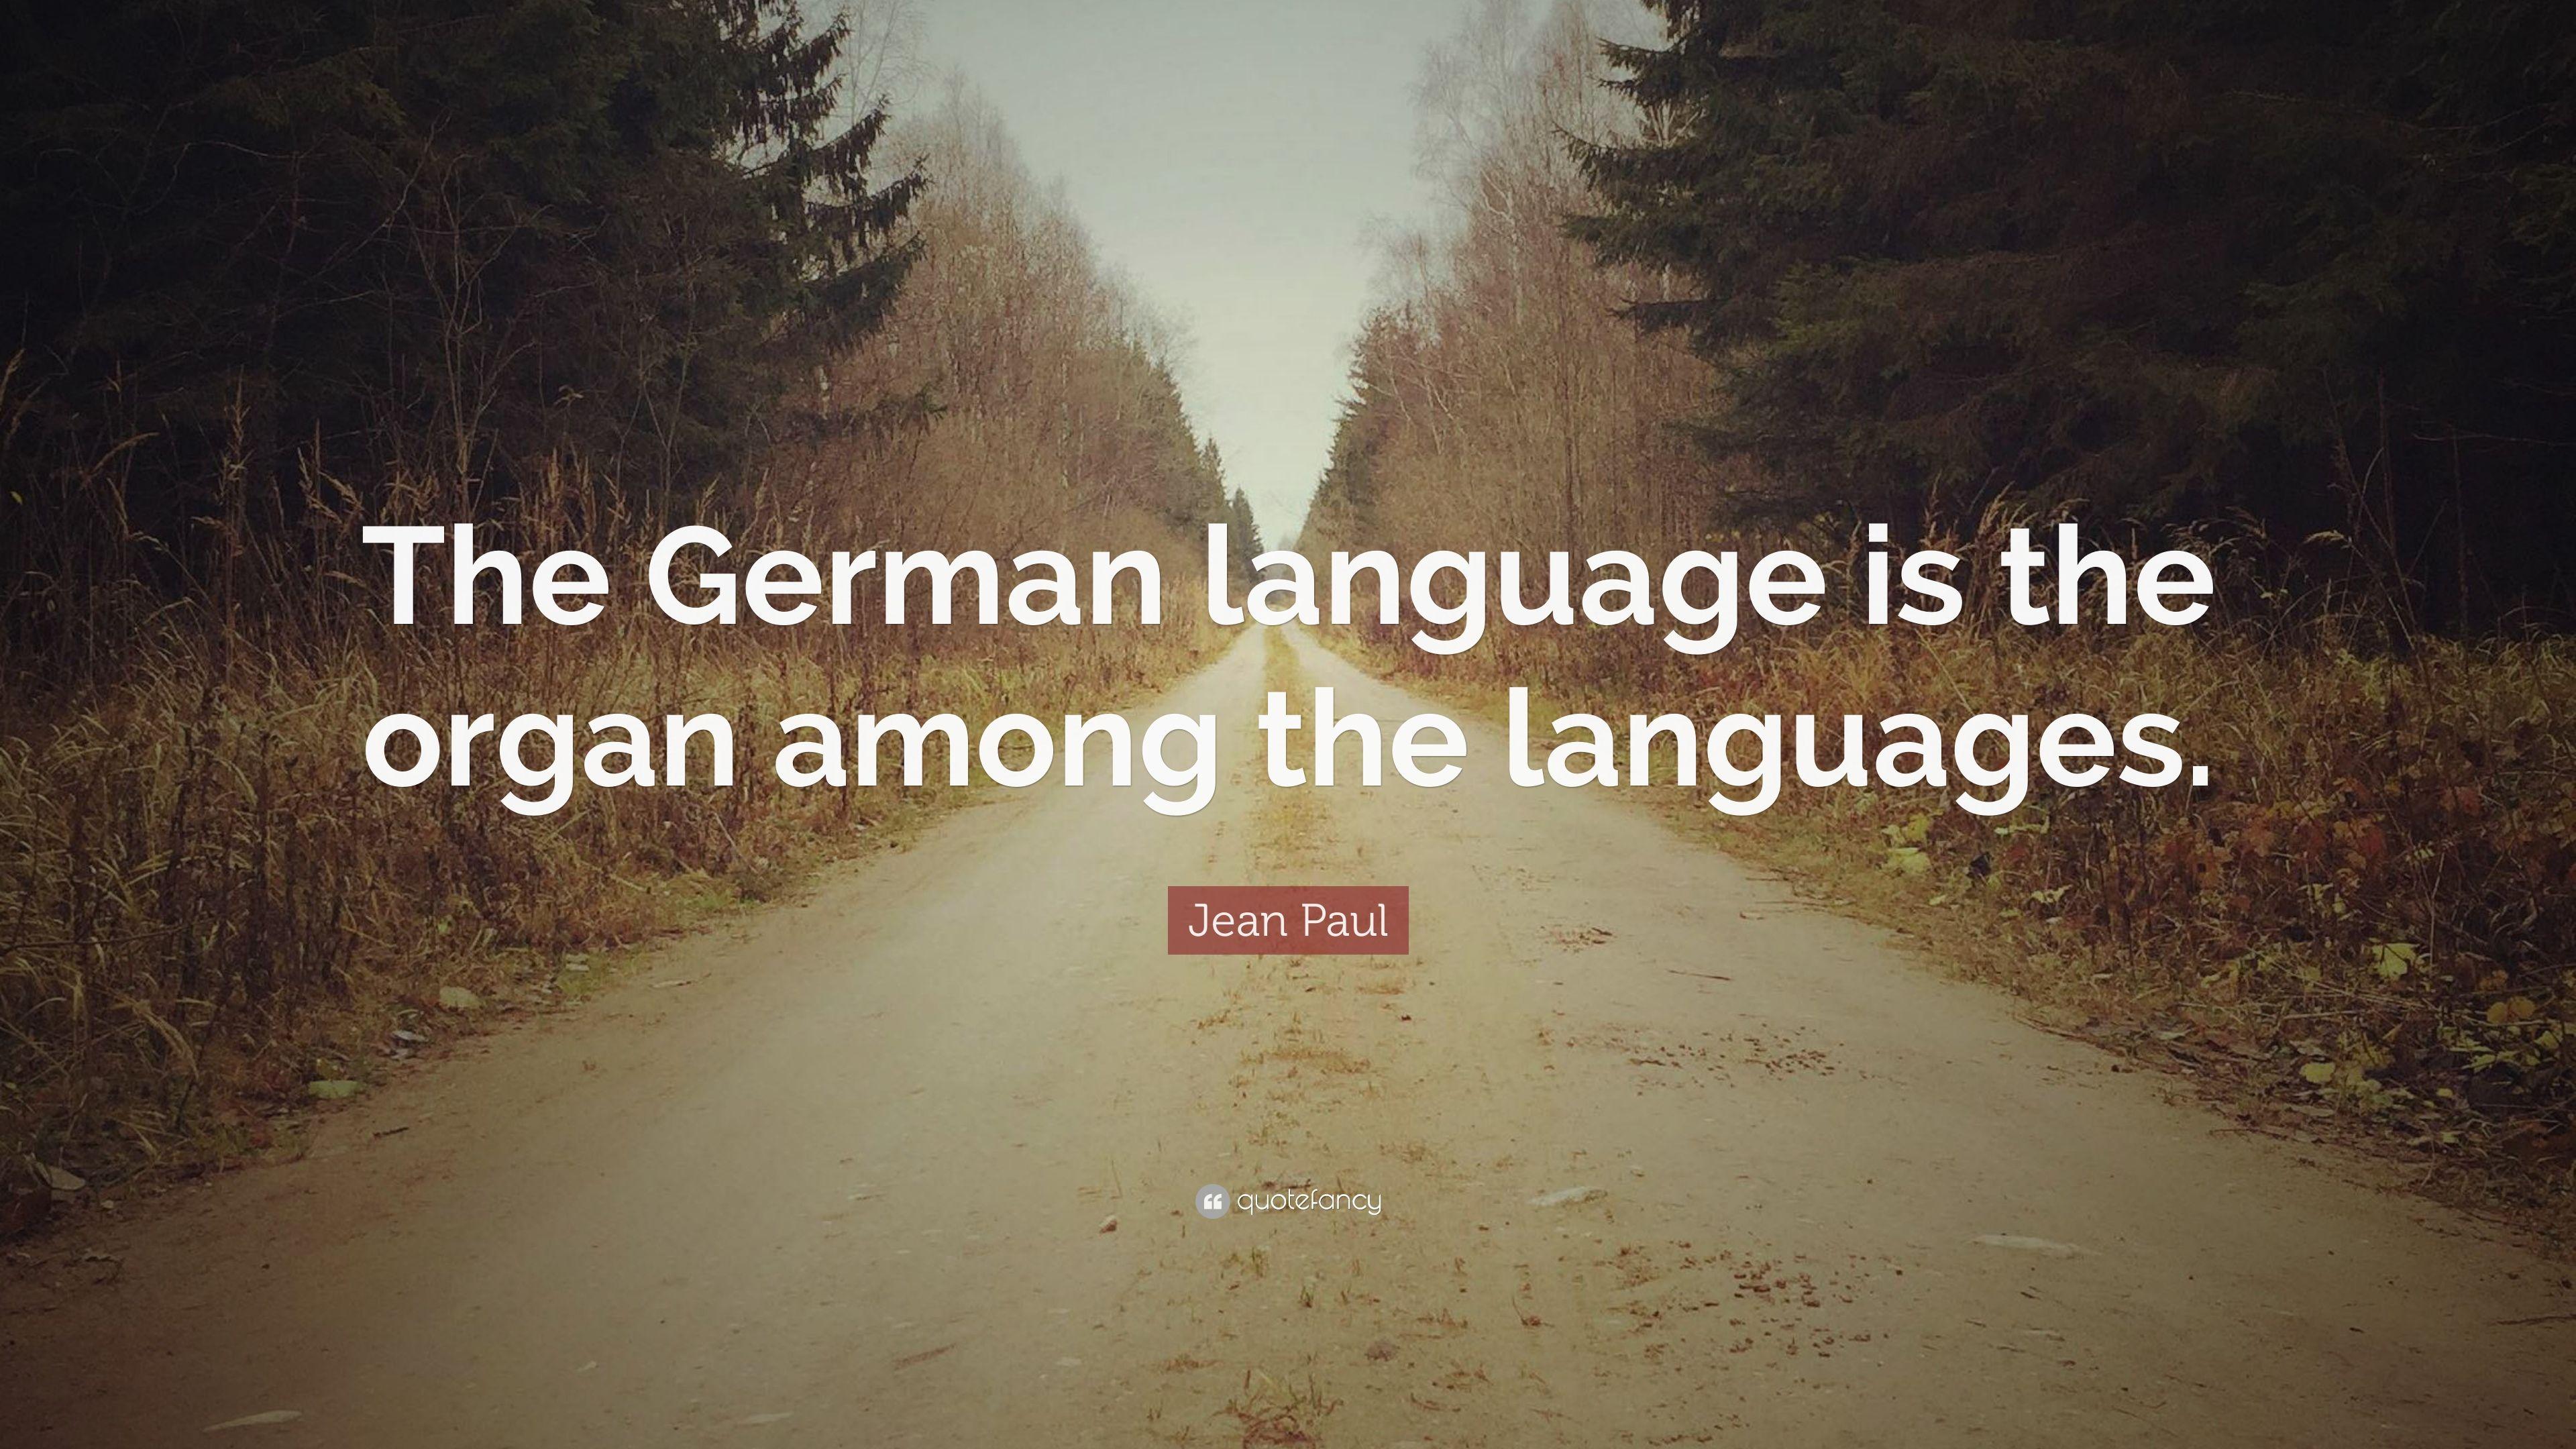 Jean Paul Quote: “The German language is the organ among